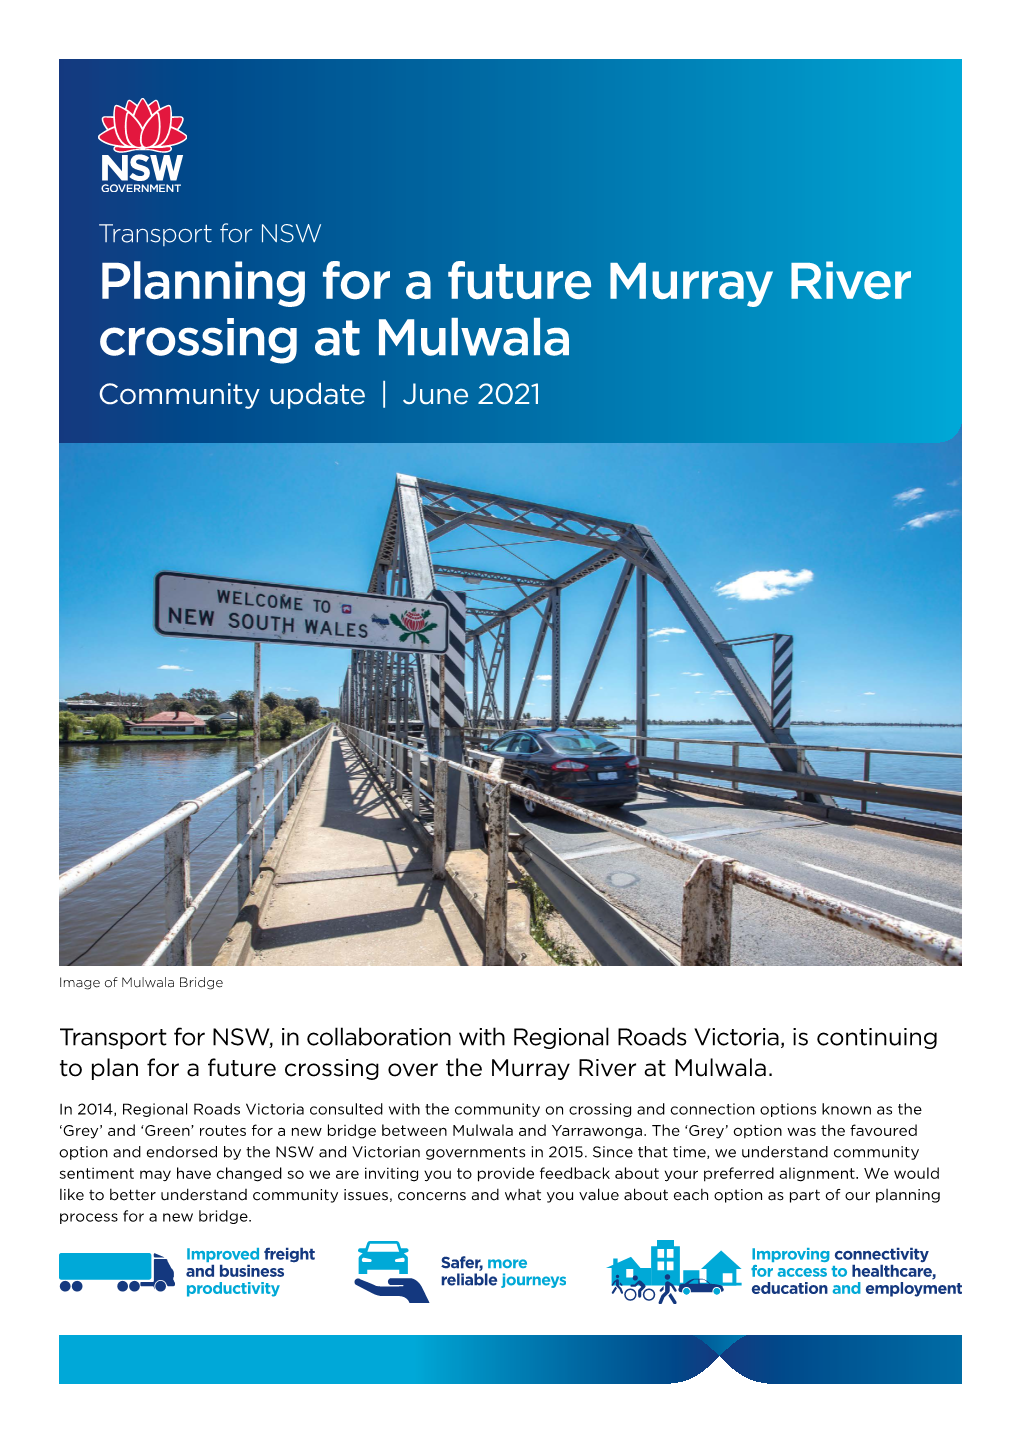 Planning for a Future Murray River Crossing at Mulwala Community Update | June 2021